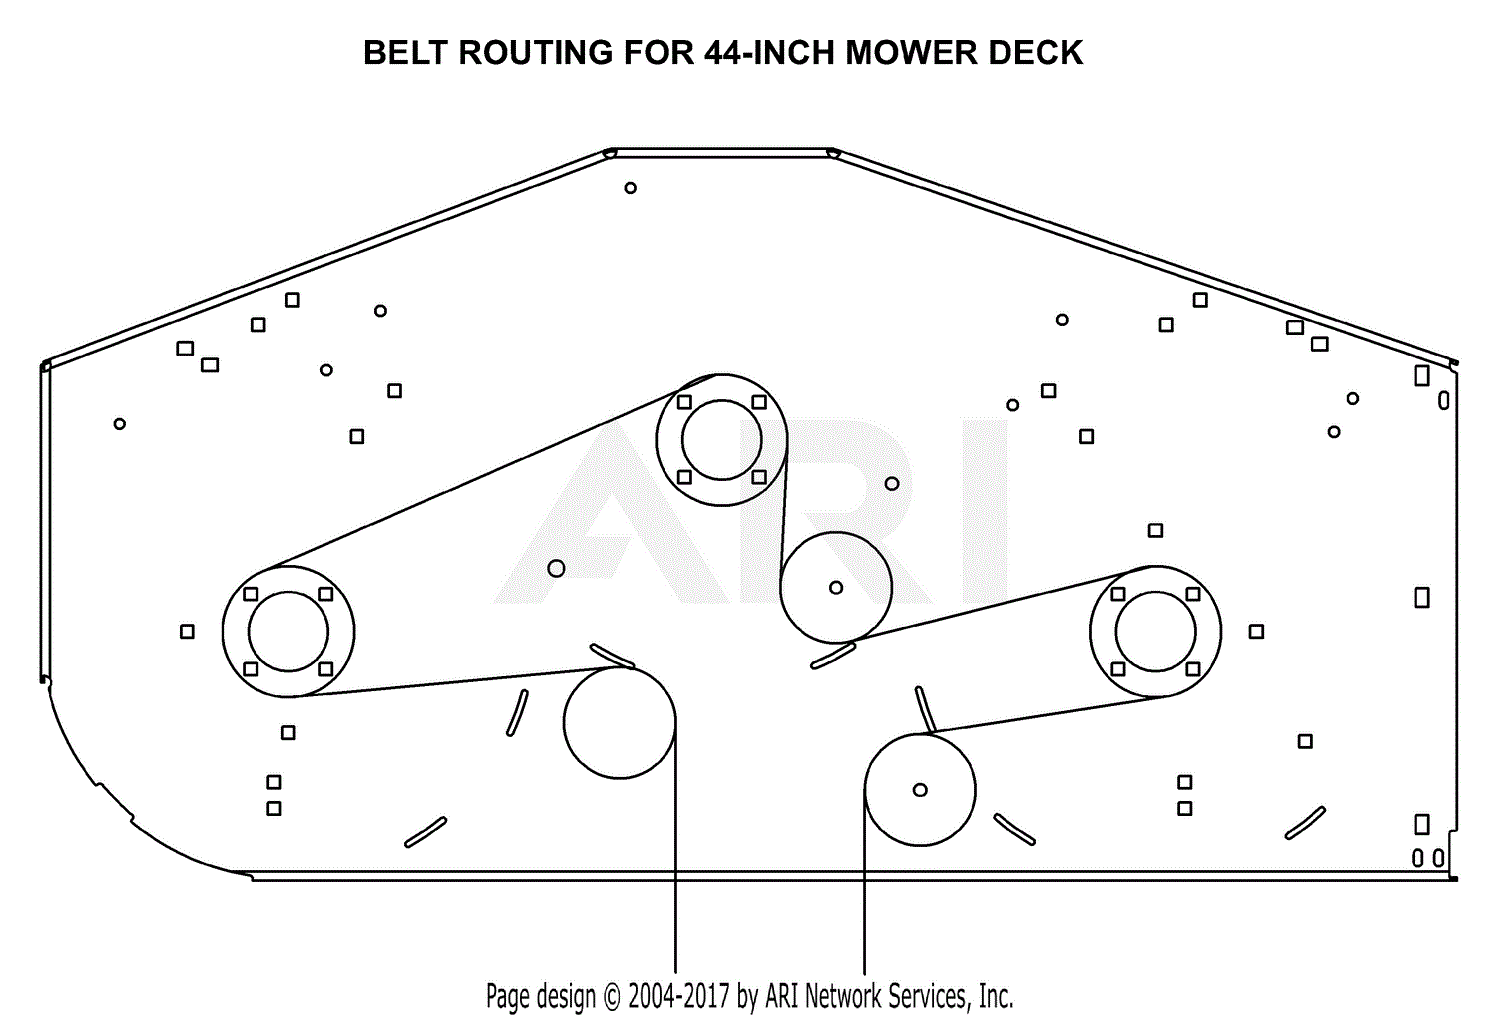 Gravely 515149 44 Zt Deck Kit Parts Diagram For Belt Routing For 44 Inch Mower Deck